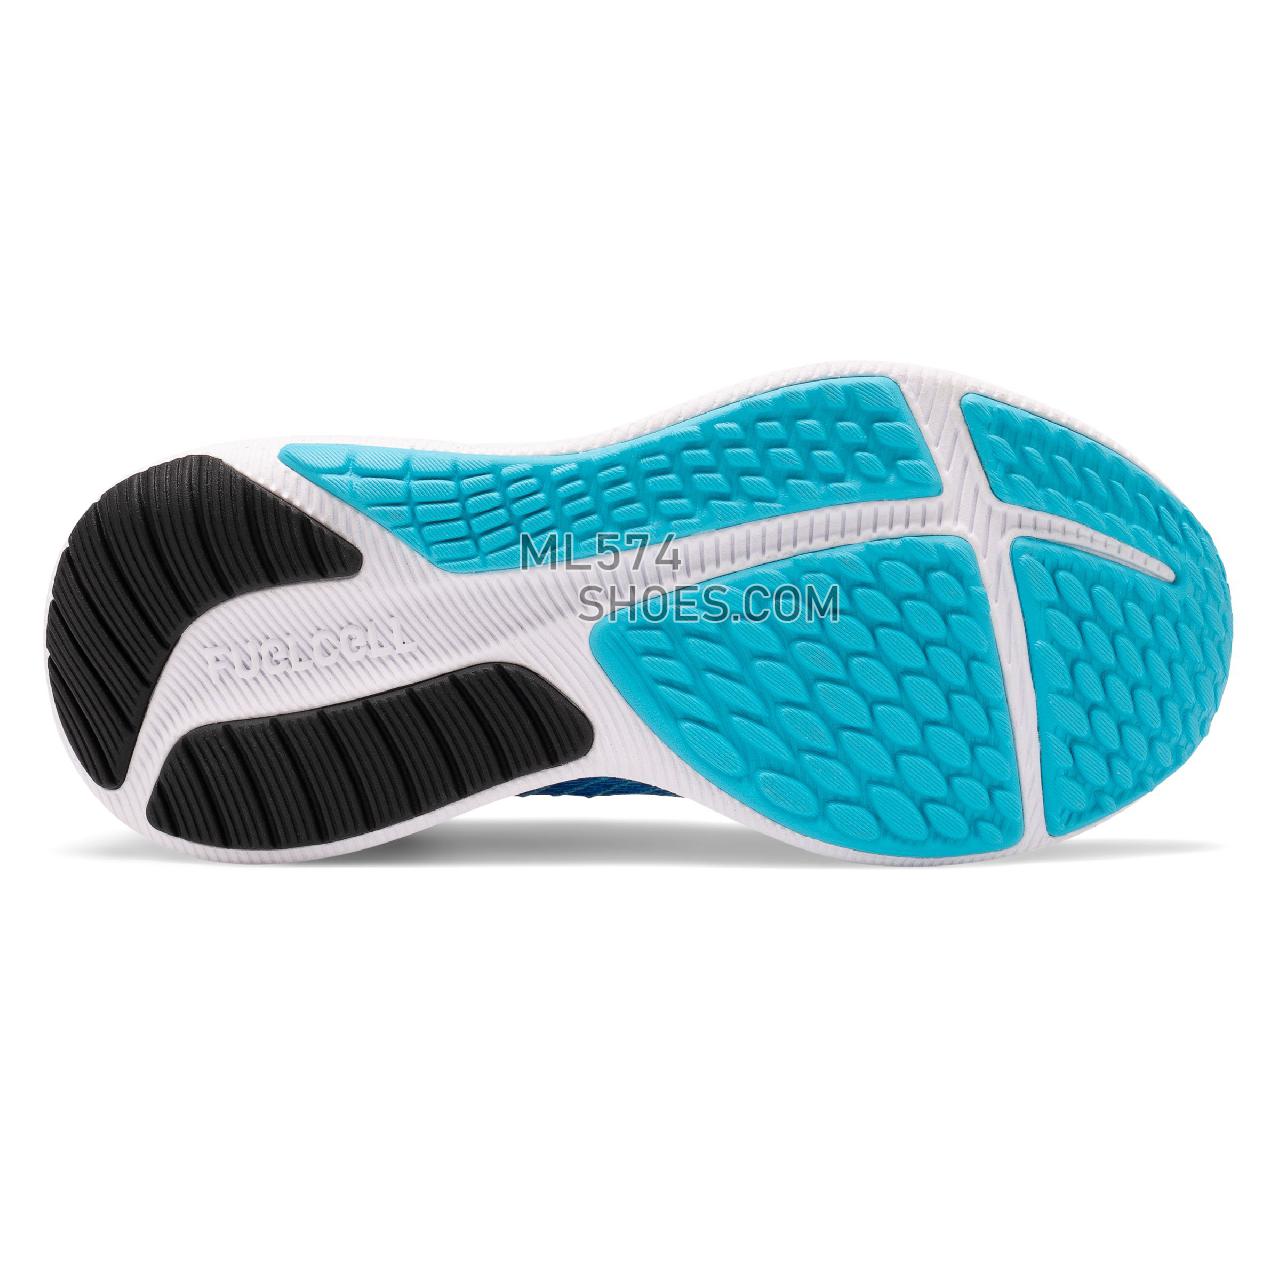 New Balance FuelCell Propel - Women's Neutral Running - Bayside with UV Blue and Black - WFCPRBB1